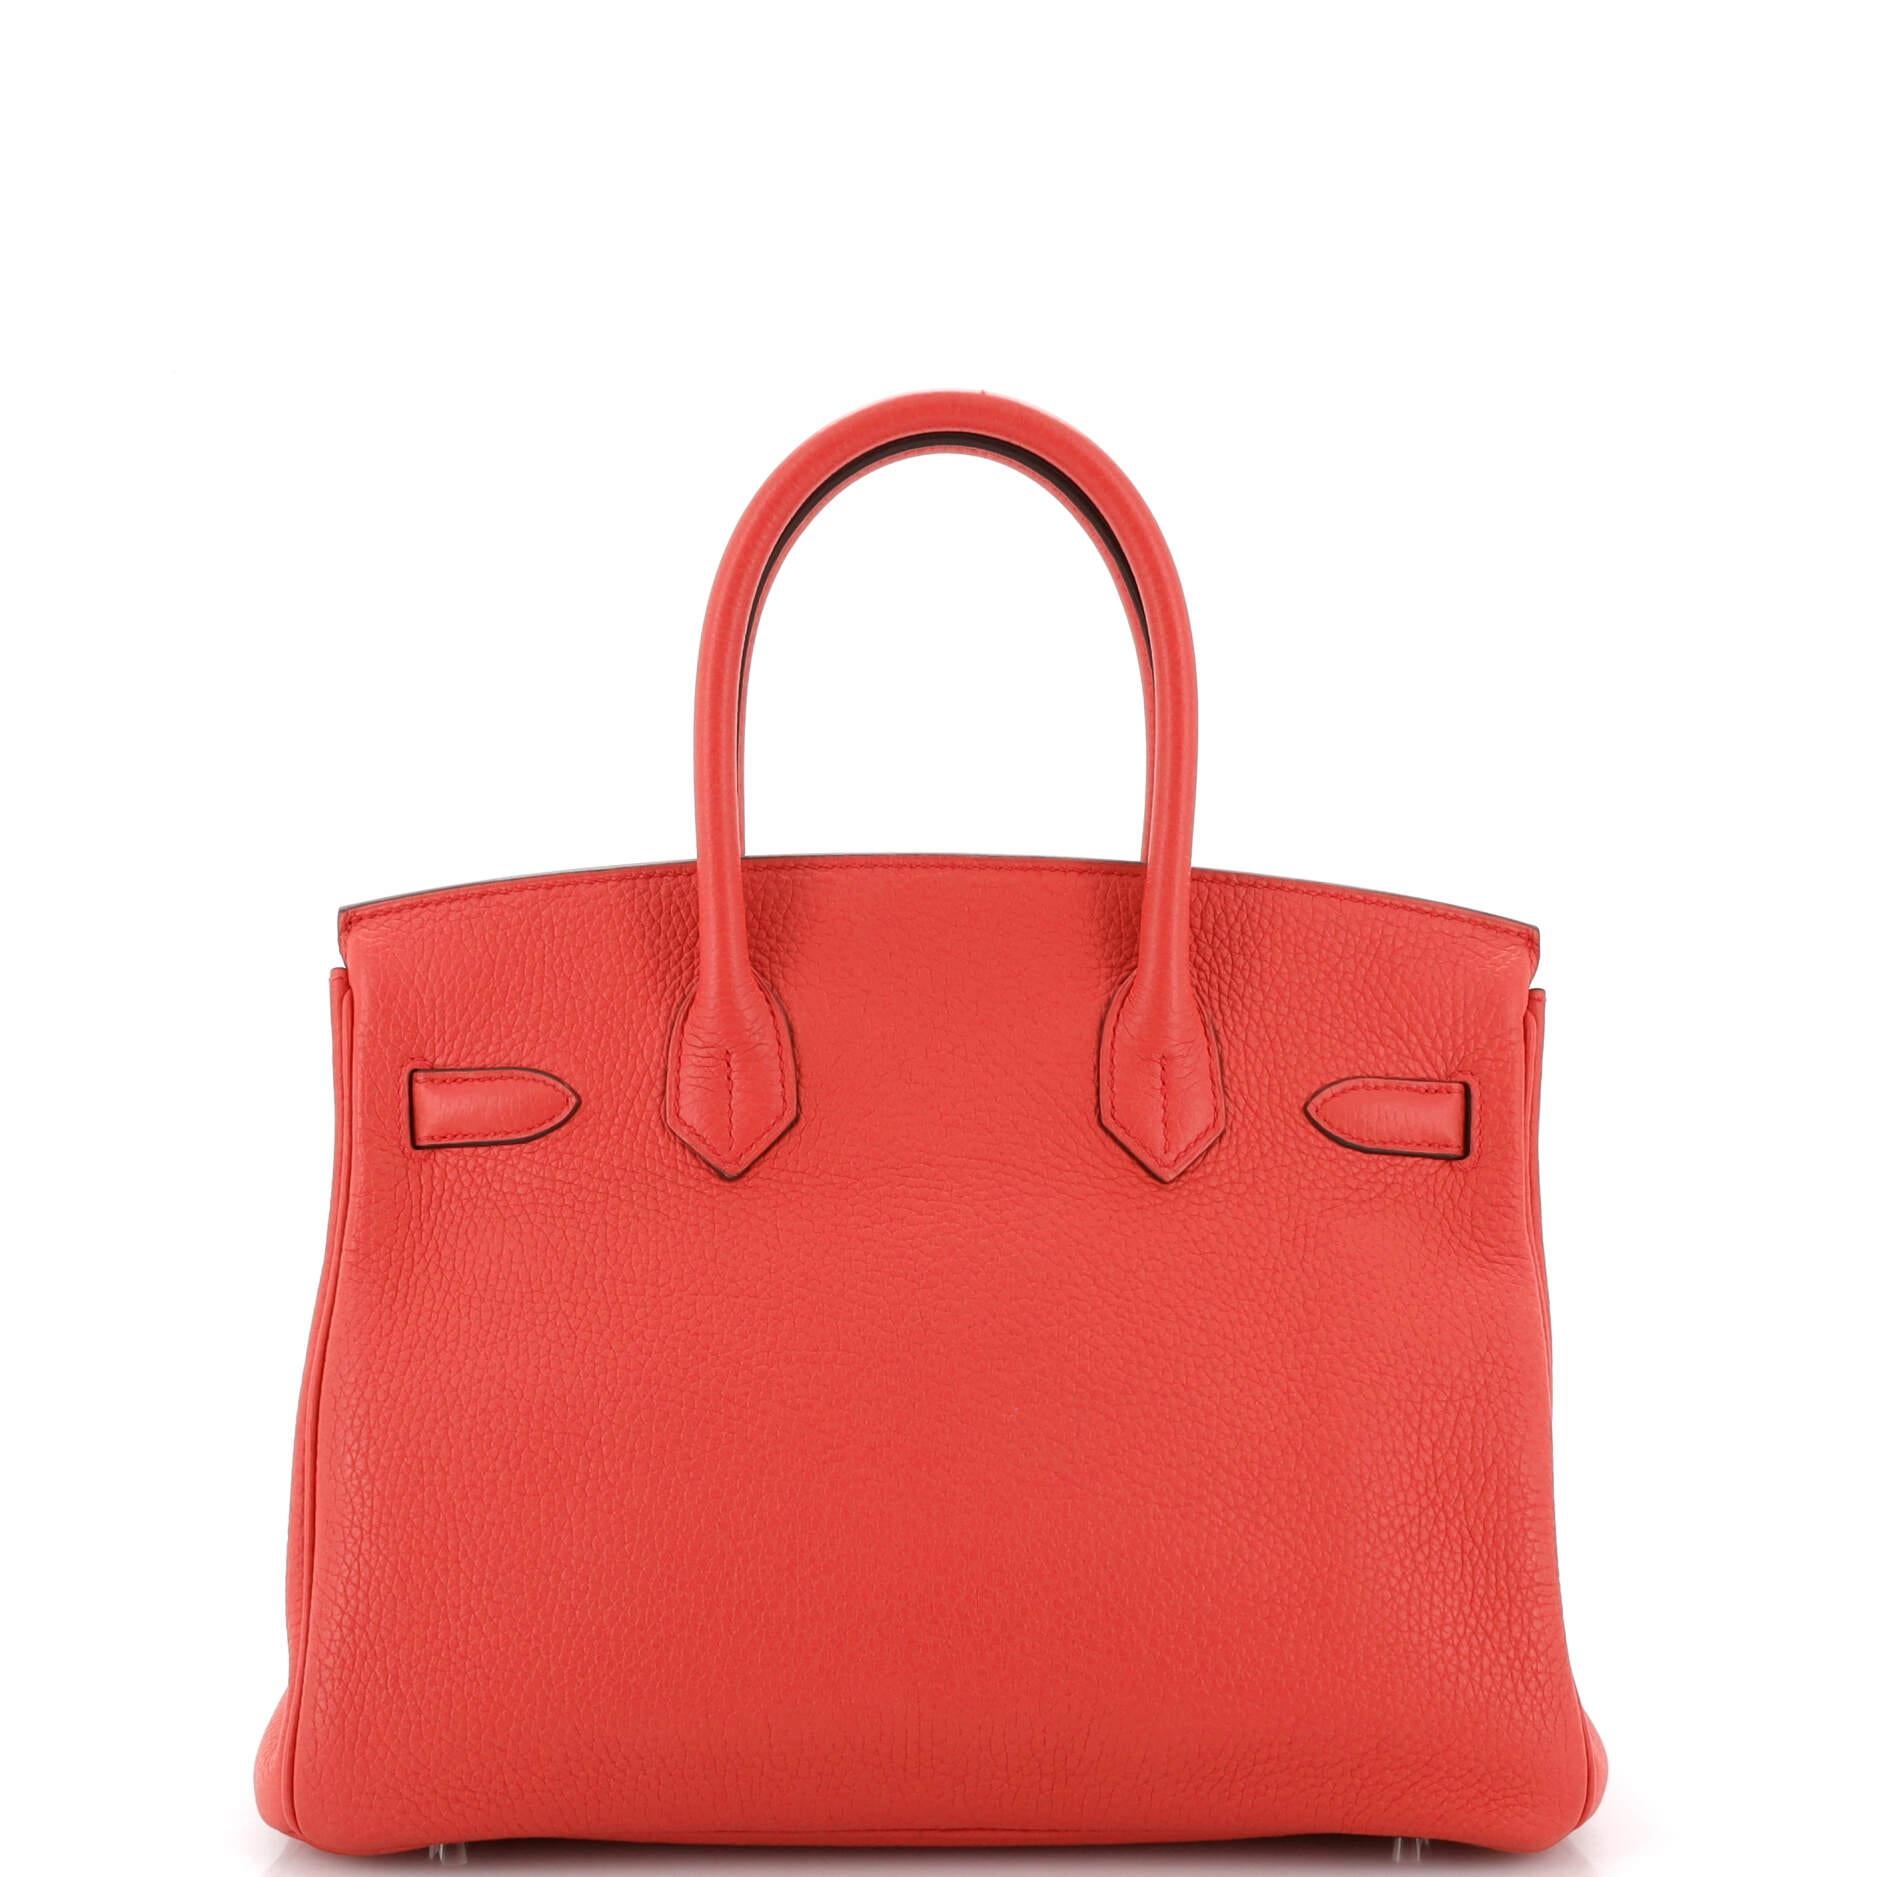 Hermes Birkin Handbag Bougainvillier Clemence with Palladium Hardware 30 In Good Condition For Sale In NY, NY